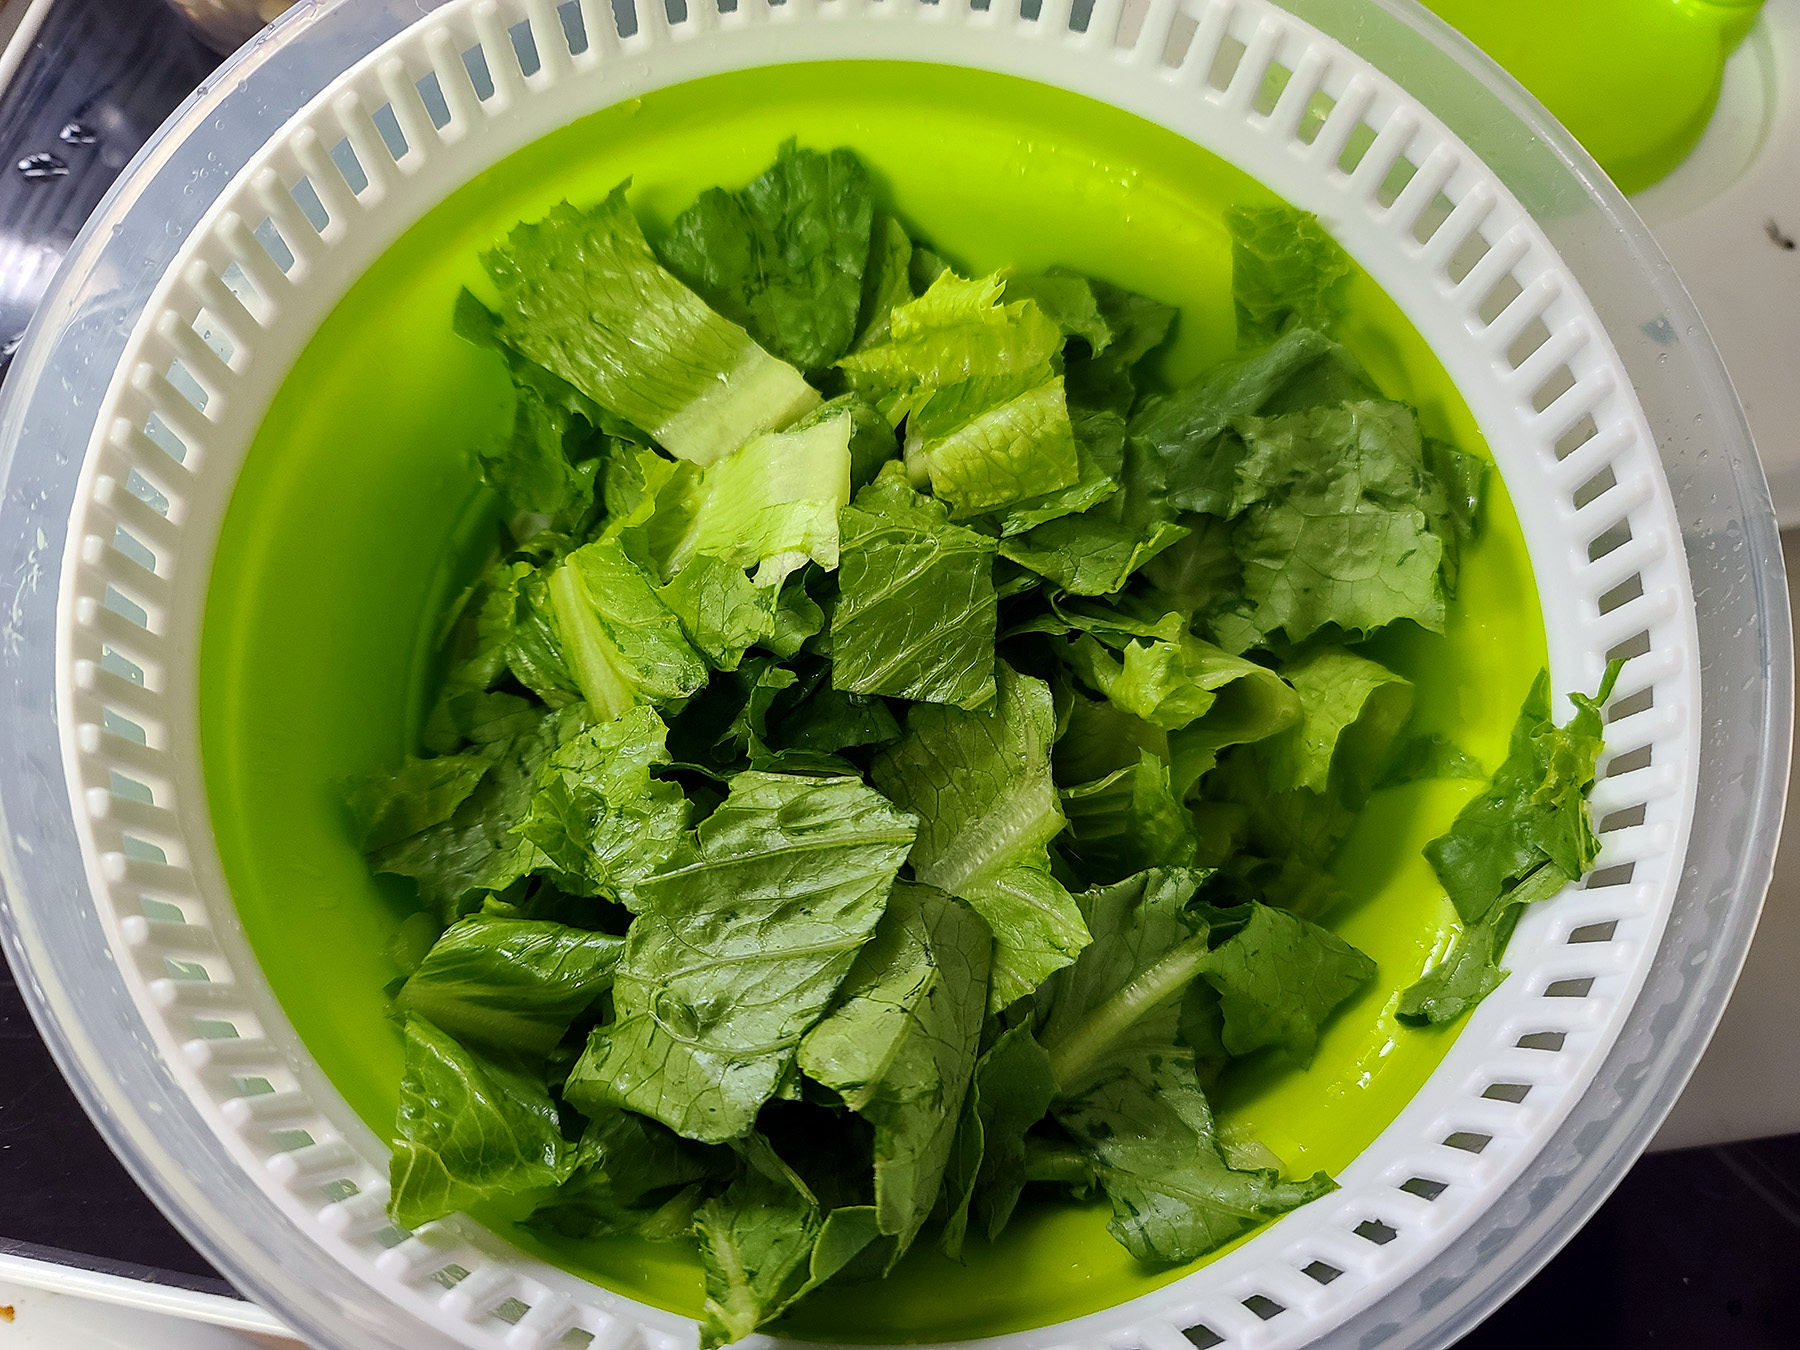 Chopped Romaine lettuce in a salad spinner.